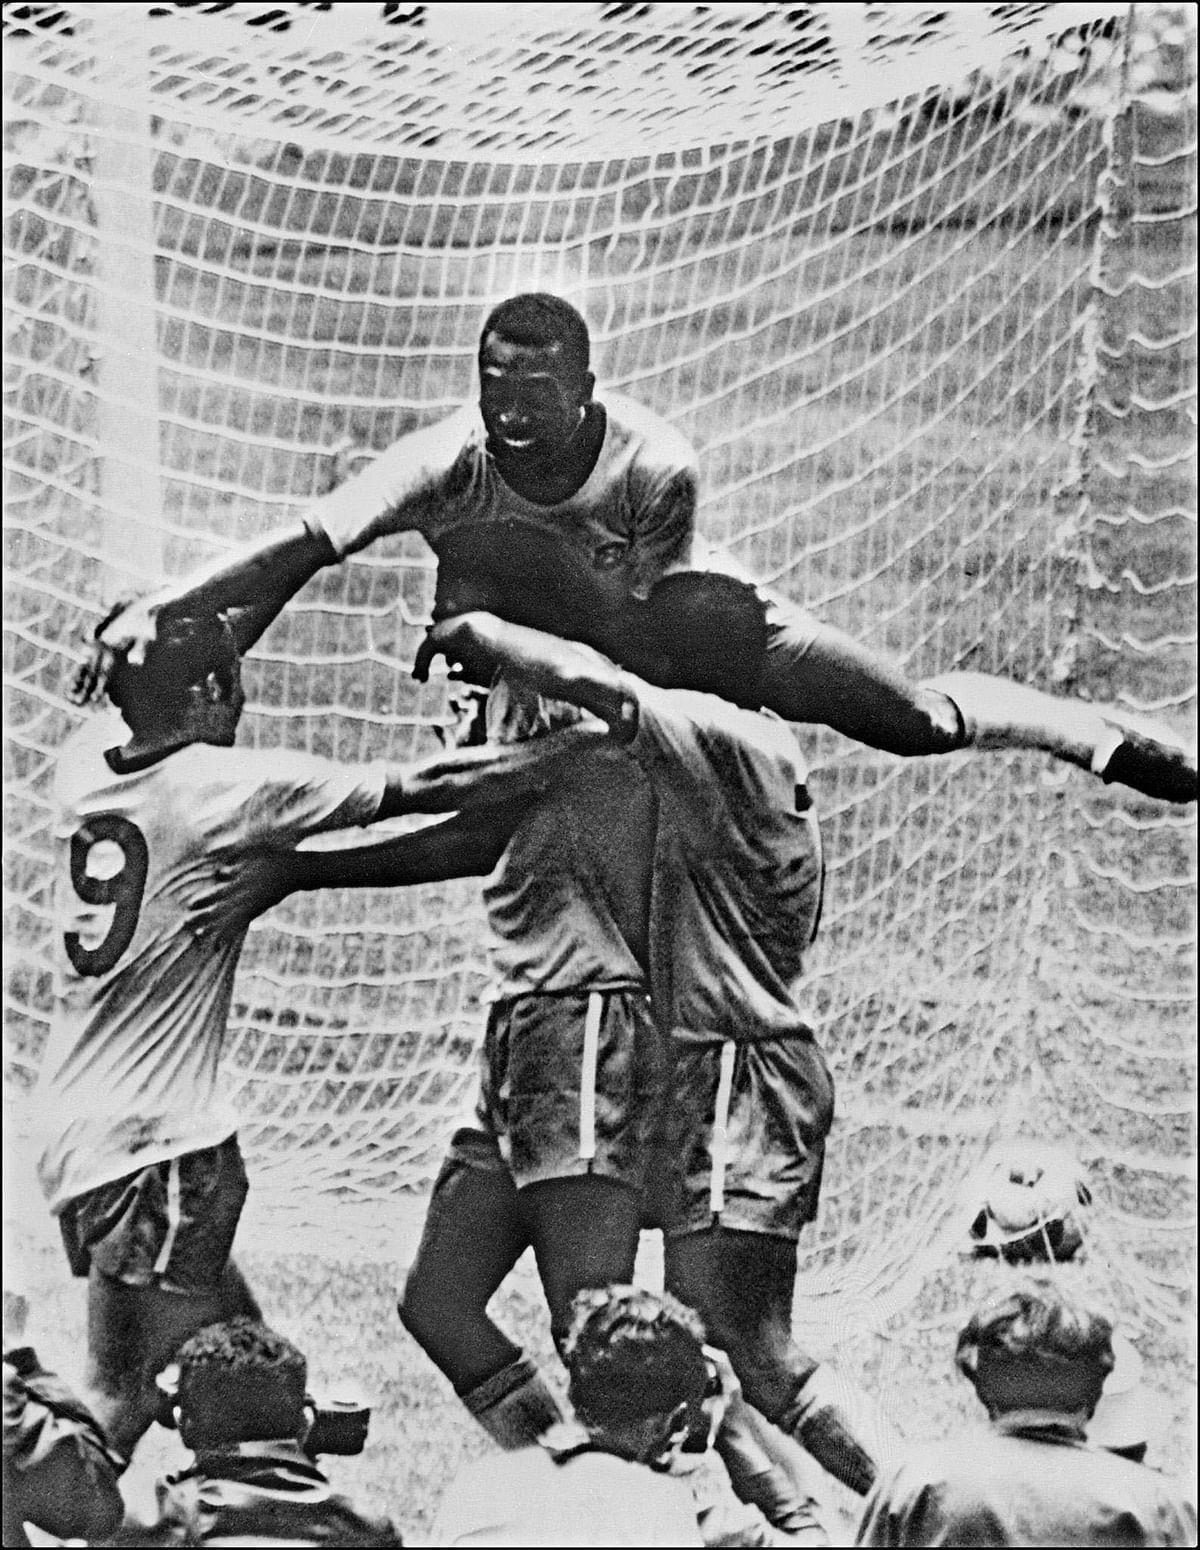 Brazilian forward Pele (top) celebrates with his teammates (from L) Tostao, Carlos Alberto and Jairzinho during the World Cup final against Italy on 21 June 1970 in Mexico City. Brazil won 4-1 to capture its third World title after winning in 1958 in Sweden and in 1962 in Chile. Photo: AFP